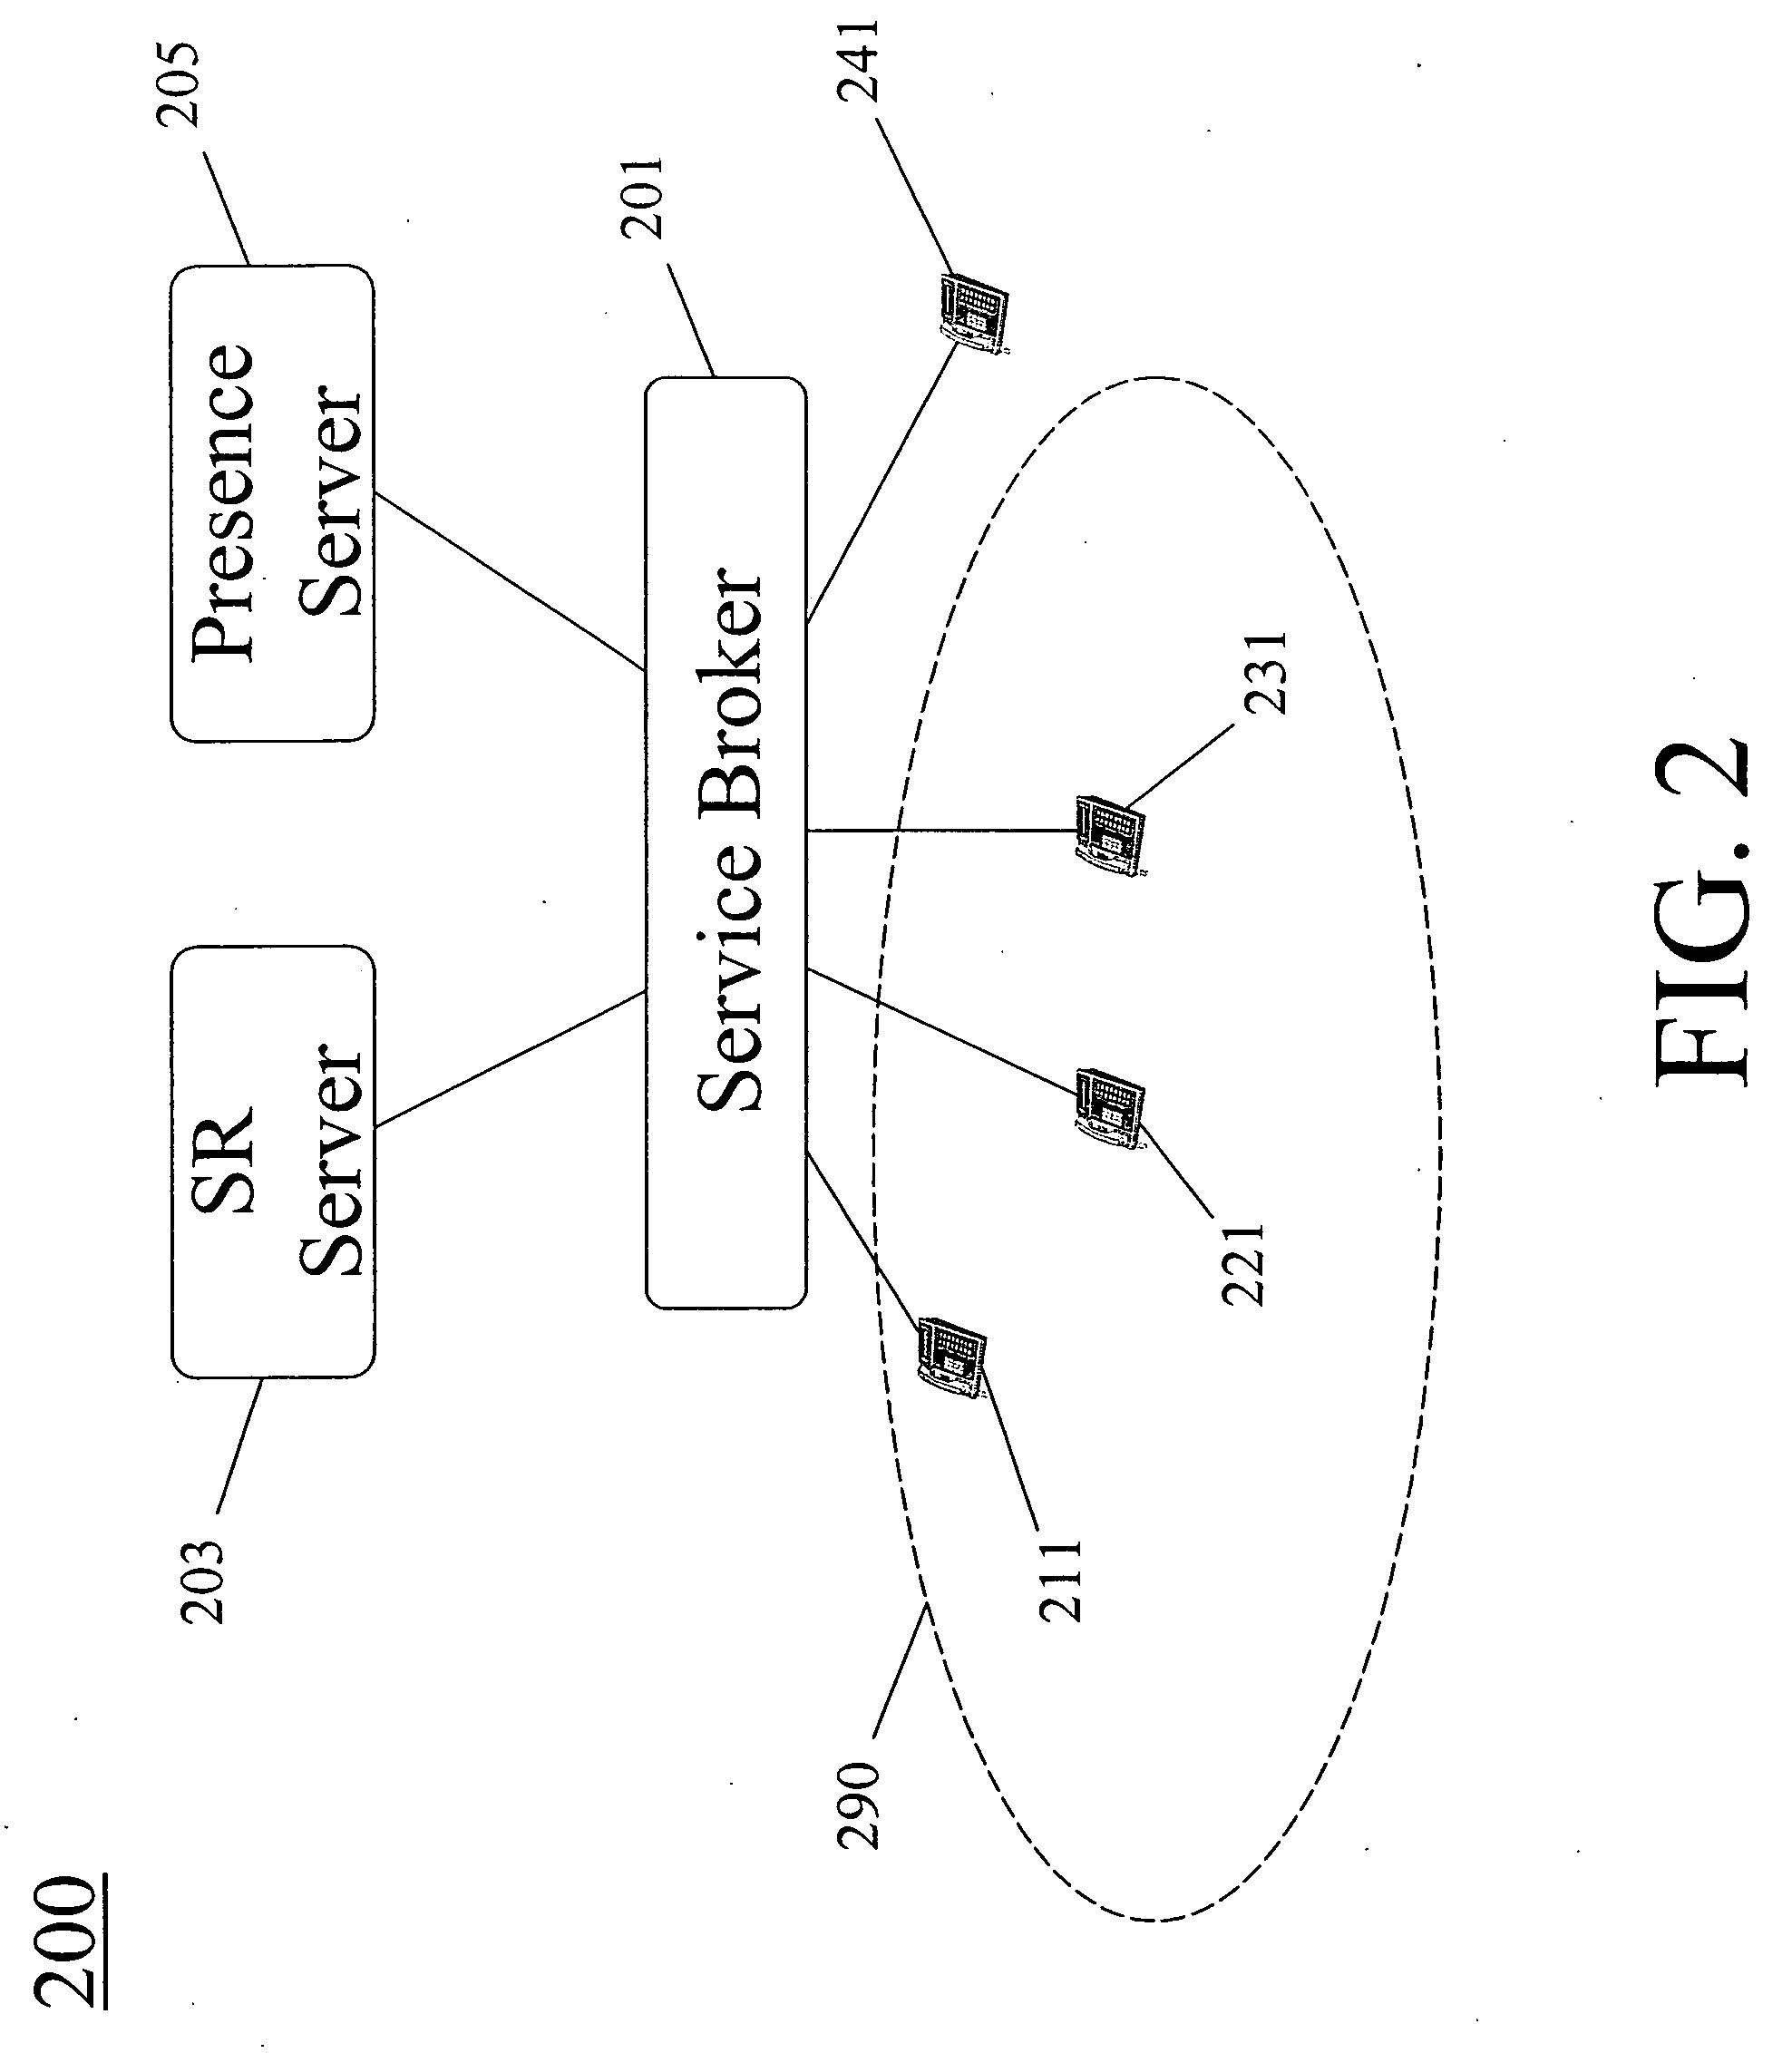 Method for providing feature interaction management and service blending